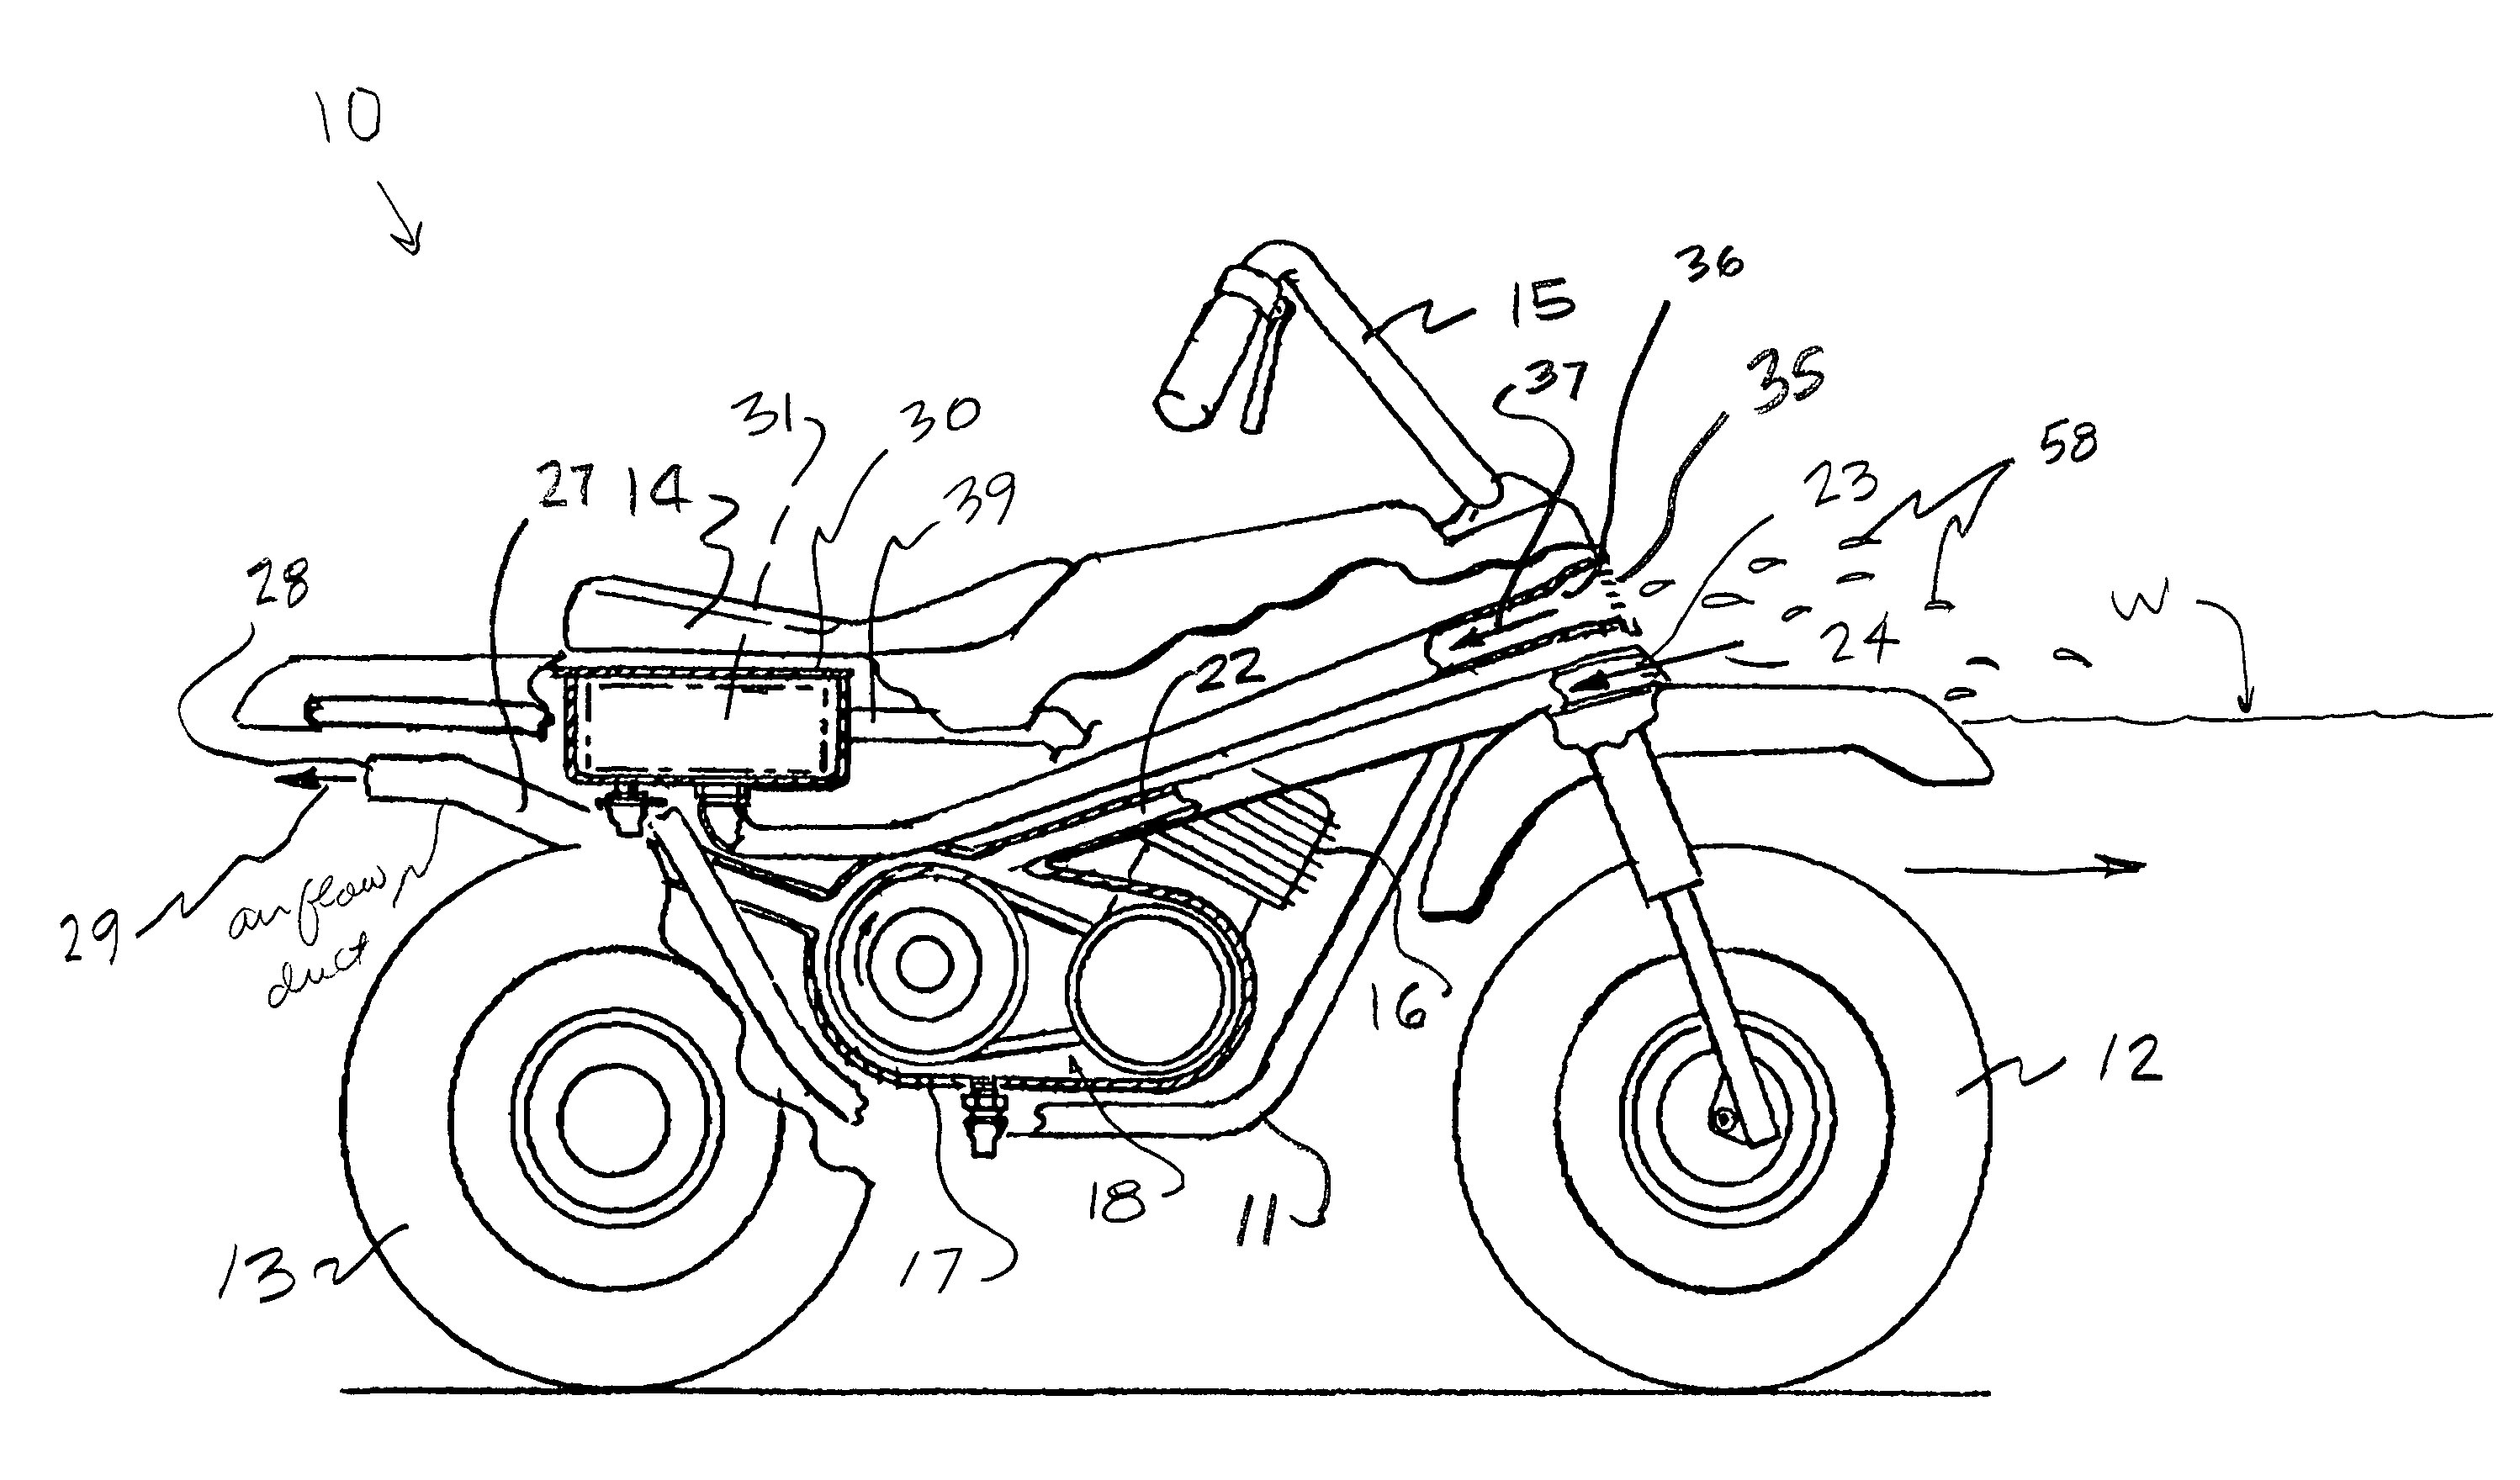 ATV with an improved transmission and air intake